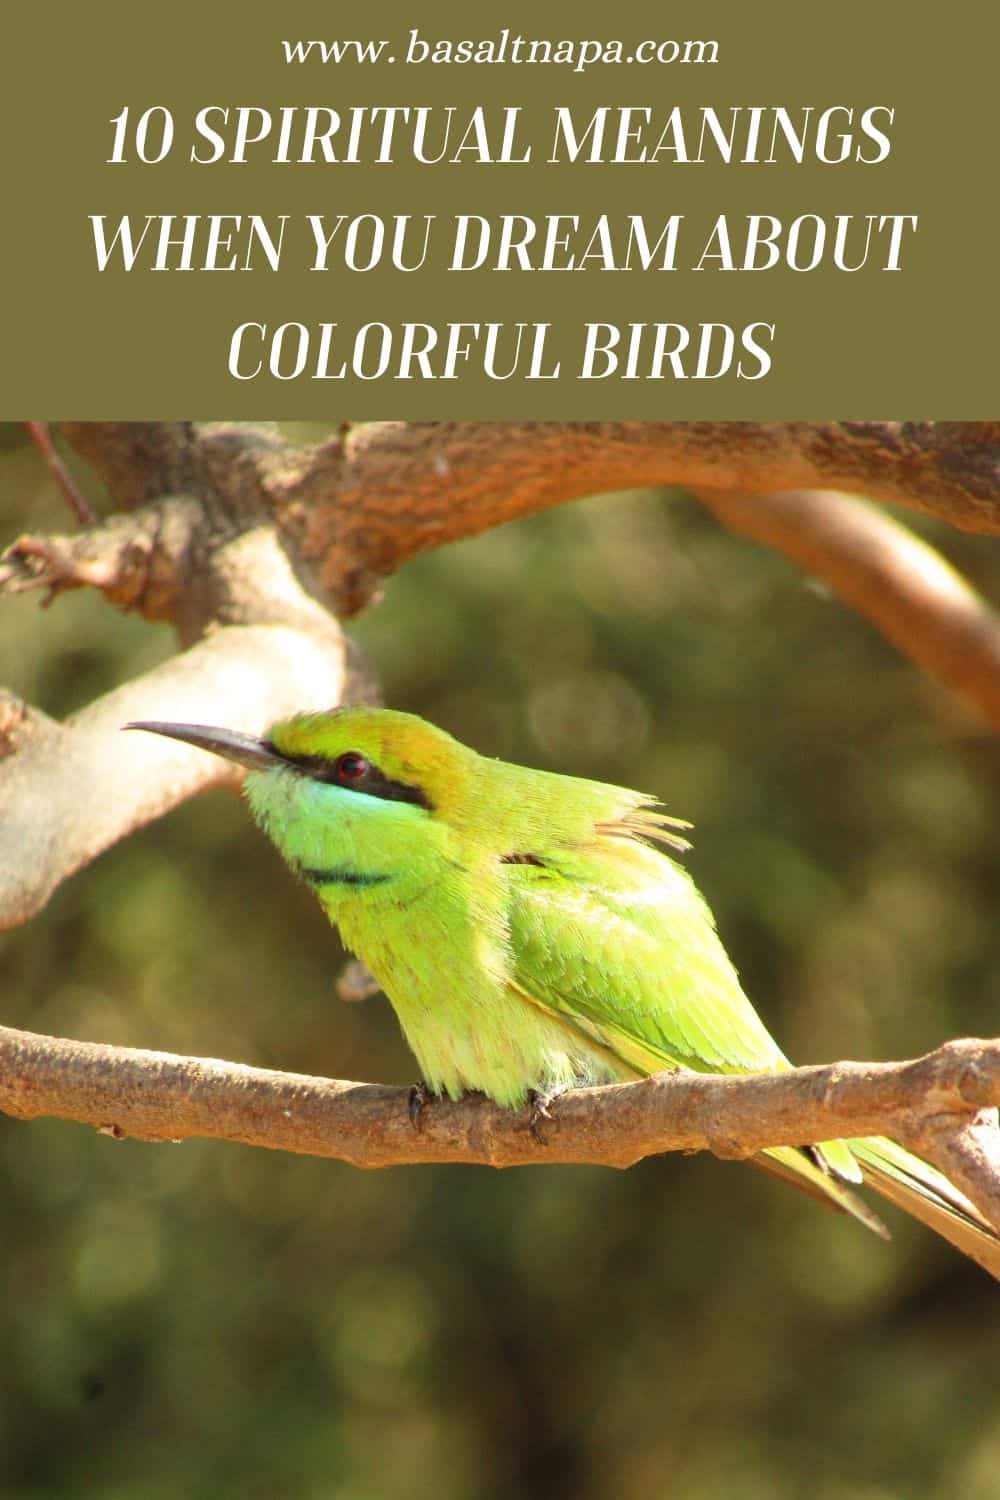 What Does It Mean When You Dream About Colorful Birds